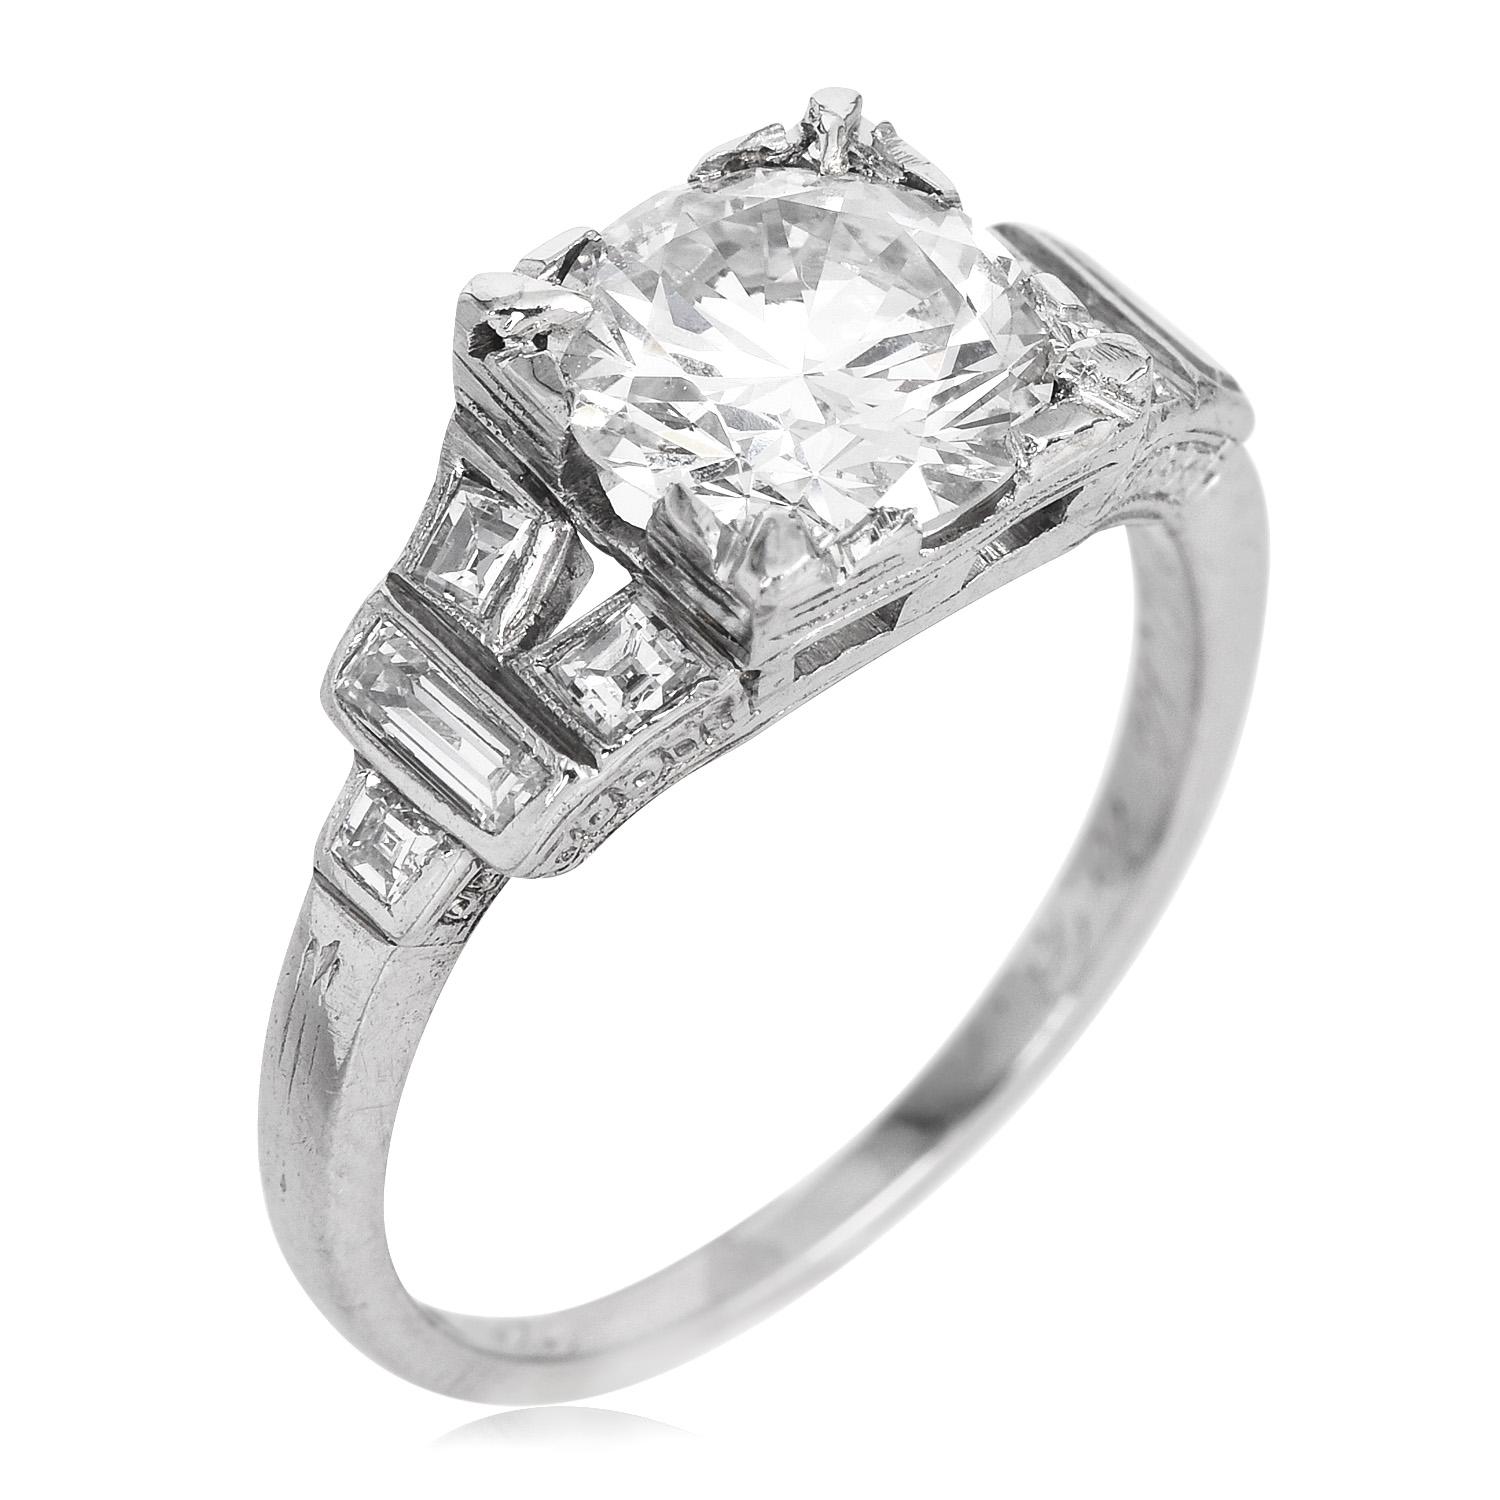 This Vintage mounting is crafted in solid Platinum, the center is adorned by a GIA-certified Round-cut, prong-set Diamond, weighing approximately 1.42 carats, H Color & VS1 Clarity.

Complimenting the sides, there are (8) baguette cut, flush set,